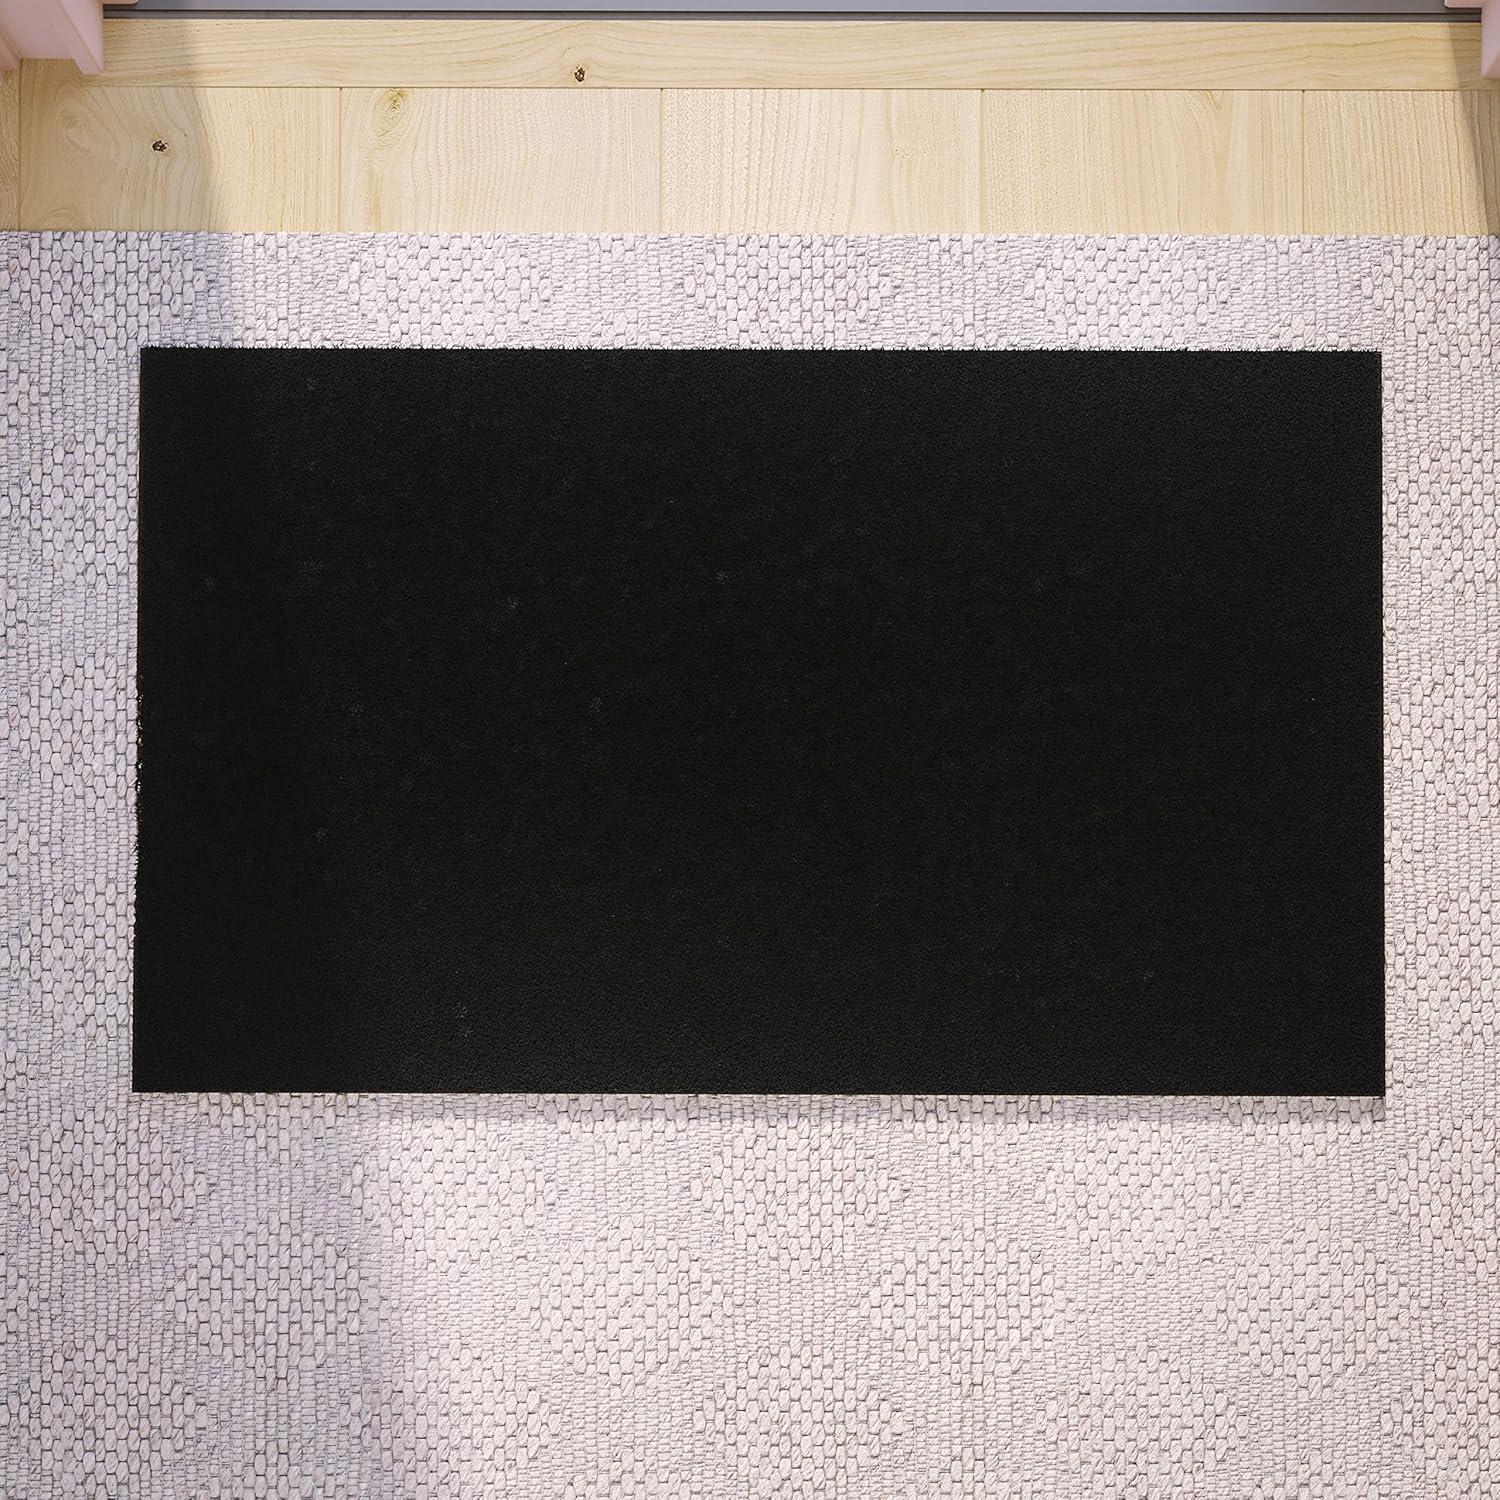 Solid Black Natural Coir 18" x 30" Outdoor Doormat with Non-Slip Backing